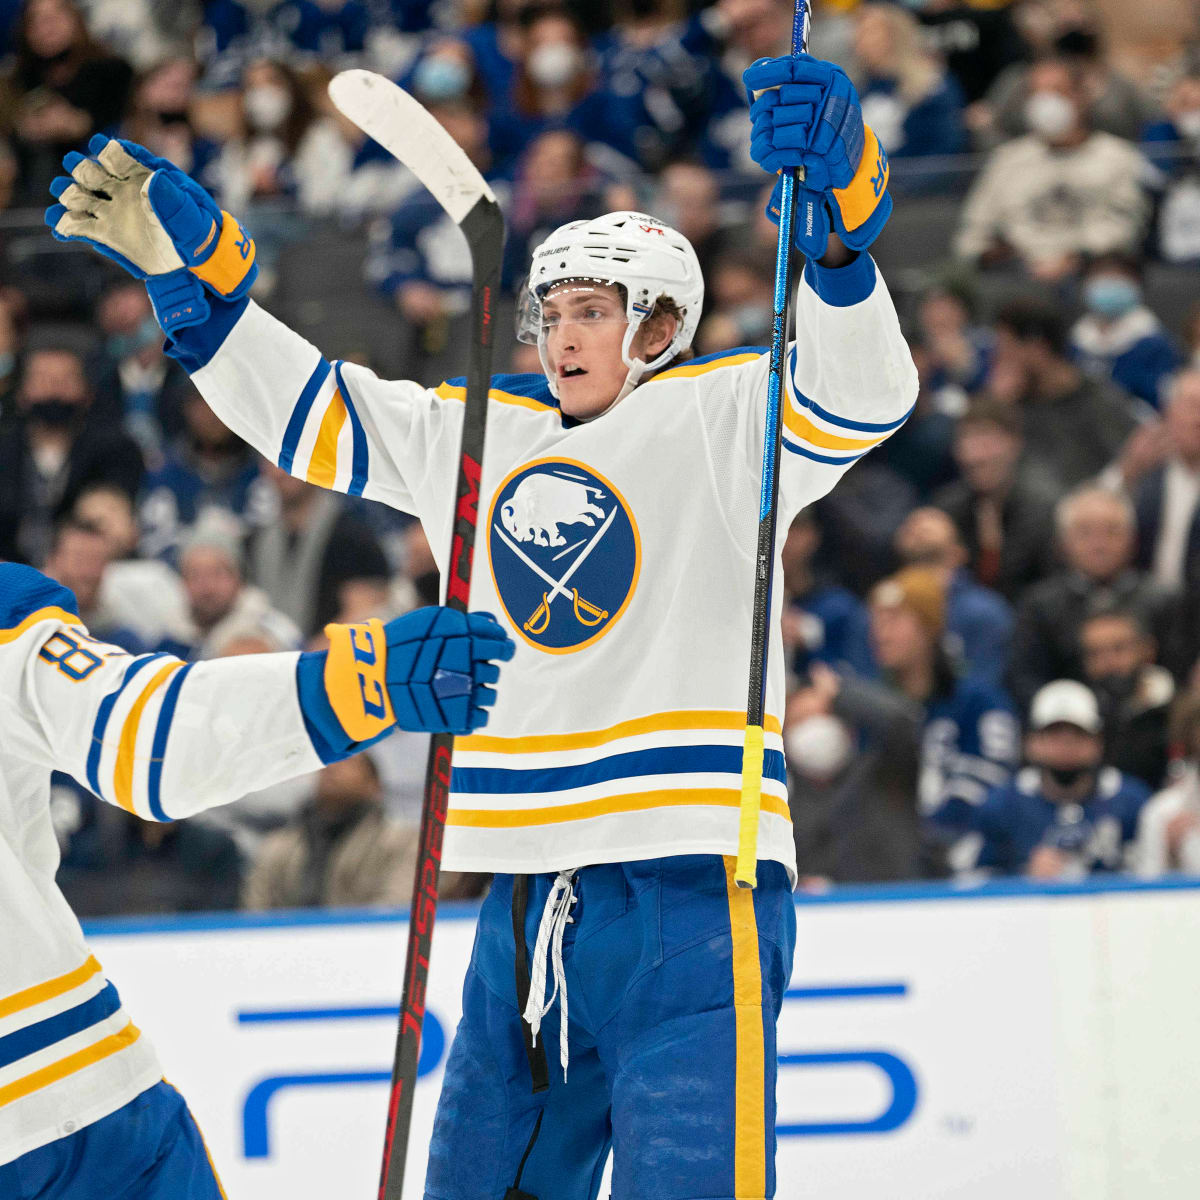 Buffalo Sabres make a big gamble with contract for forward Tage Thompson